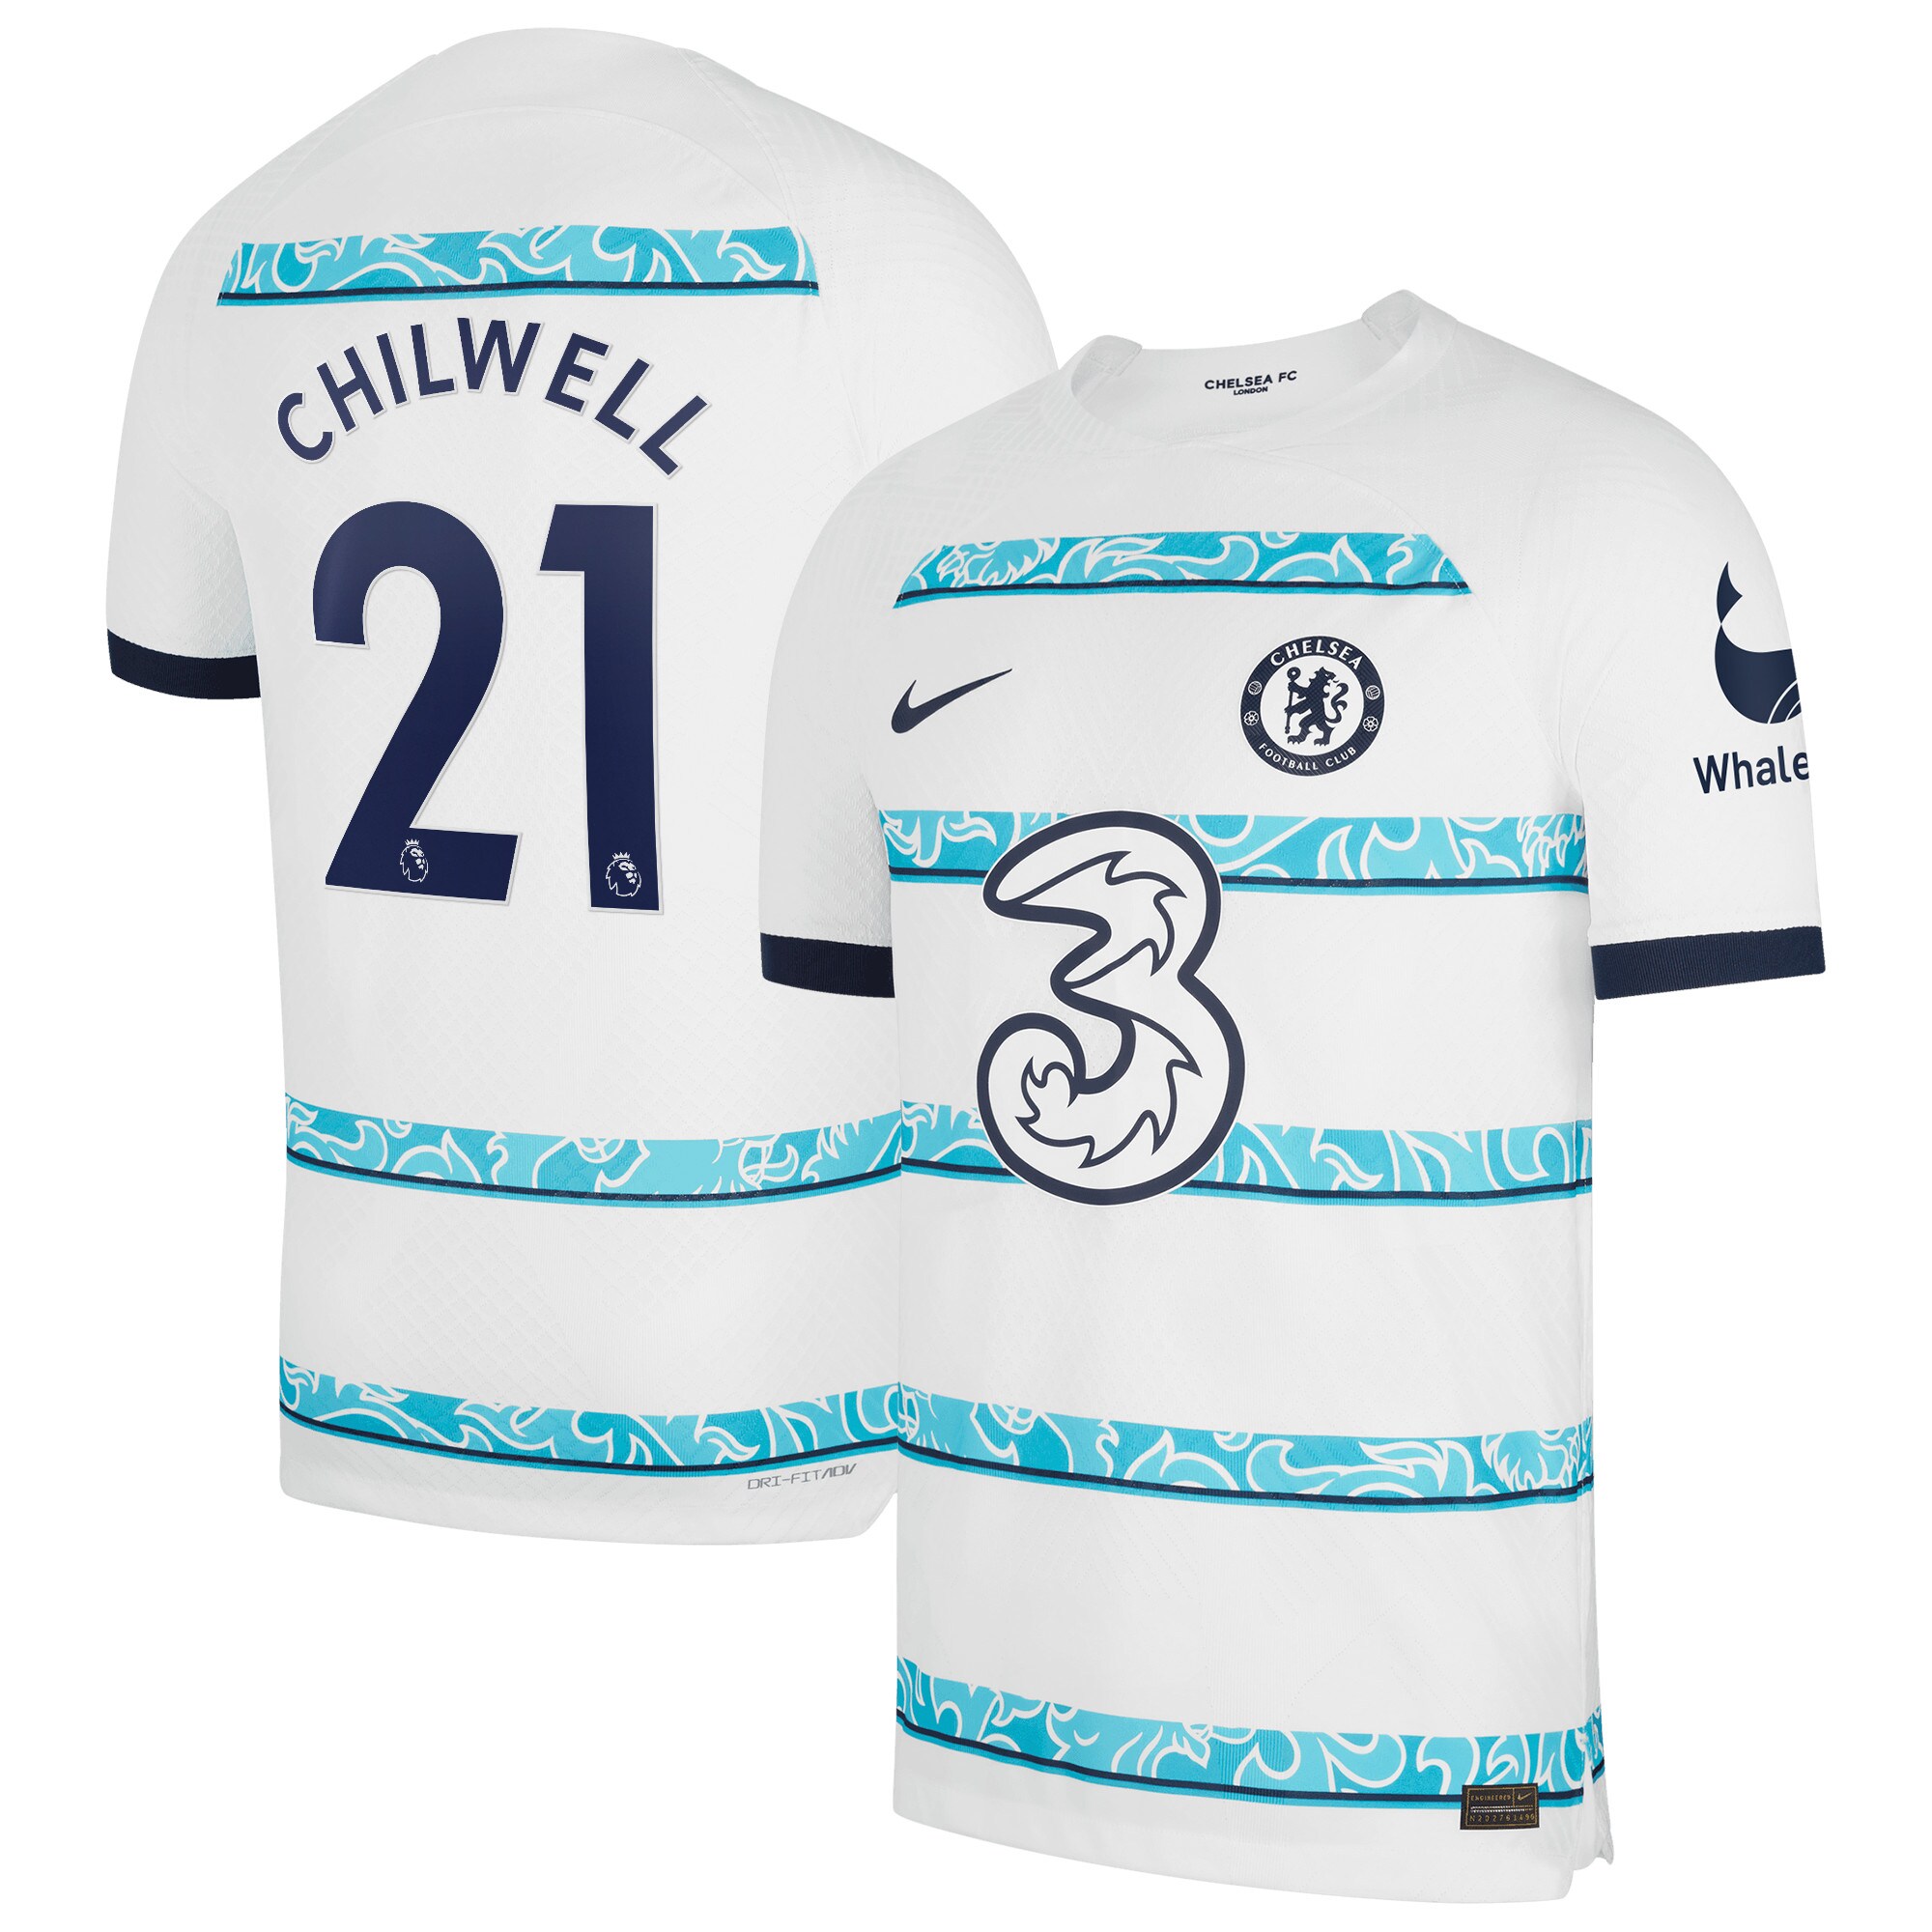 Chelsea Away Vapor Match Shirt 2022-23 with Chilwell 21 printing